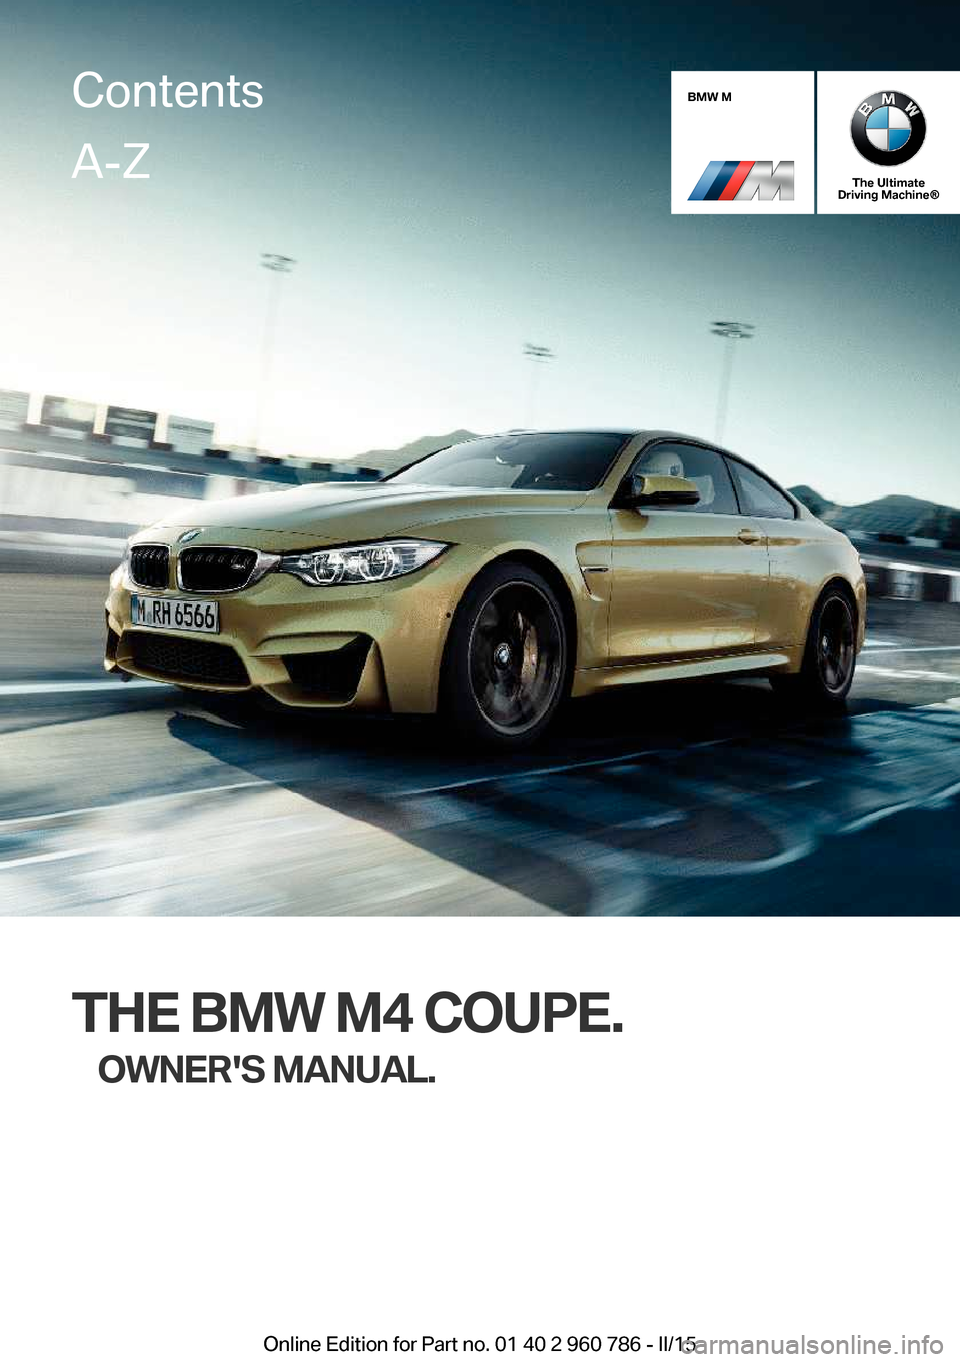 BMW M4 COUPE 2015 F82 Owners Manual BMW M
The Ultimate
Driving Machine®
THE BMW M4 COUPE.
OWNERS MANUAL.
ContentsA-Z
Online Edition for Part no. 01 40 2 960 786 - II/15   